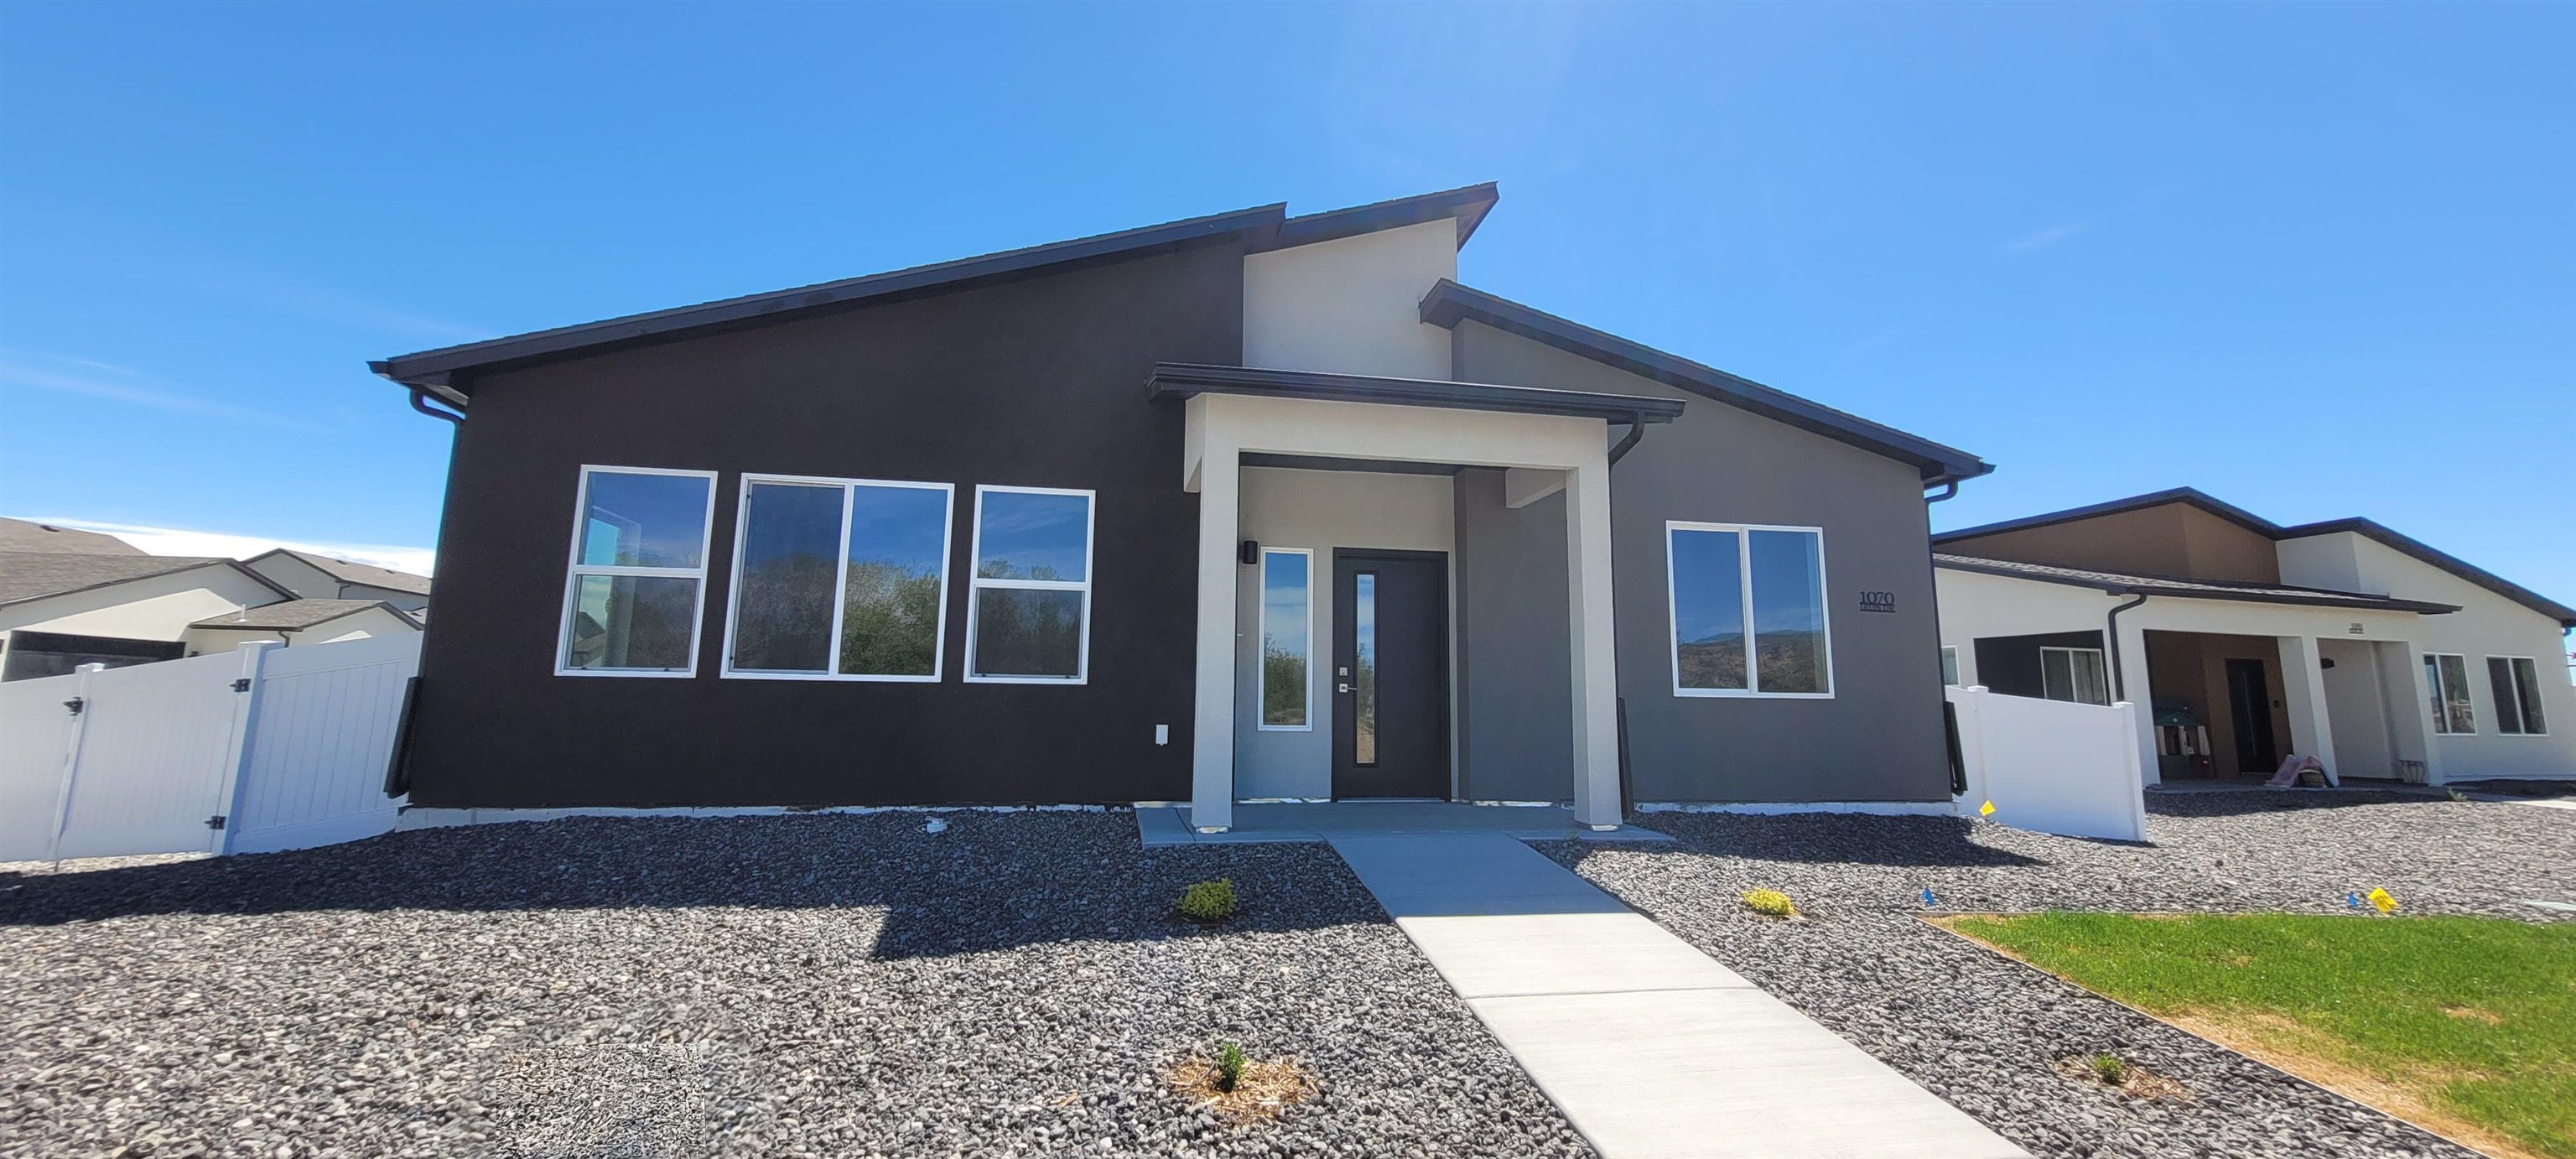 Welcome to Iron Wheel subdivision where affordability meets function!  TWO UNIQUE AND CREATIVE PREFERRED LENDER OPTIONS THAT MAY SAVE YOU UP TO SEVERAL HUNDRED DOLLARS ON YOUR PAYMENT - NO GIMMICKS - CALL FOR DETAILS!  This one-of-a-kind community will have a wide variety of home types and sizes, a walking path to FMHS & easy access to both GJ & Fruita. Pricing includes xeriscaping & fencing. These well-planned homes offer maximum functional use of space, durable yet beautiful finishes & cute outdoor living spaces that require minimal maintenance. NO FINISH CHOICE OPTIONS AVAILABLE. Ranch, 3 bed, 2 bath. Our Builder Advantage program can help you get 1% in closing costs through sellers preferred lender. Call for details.